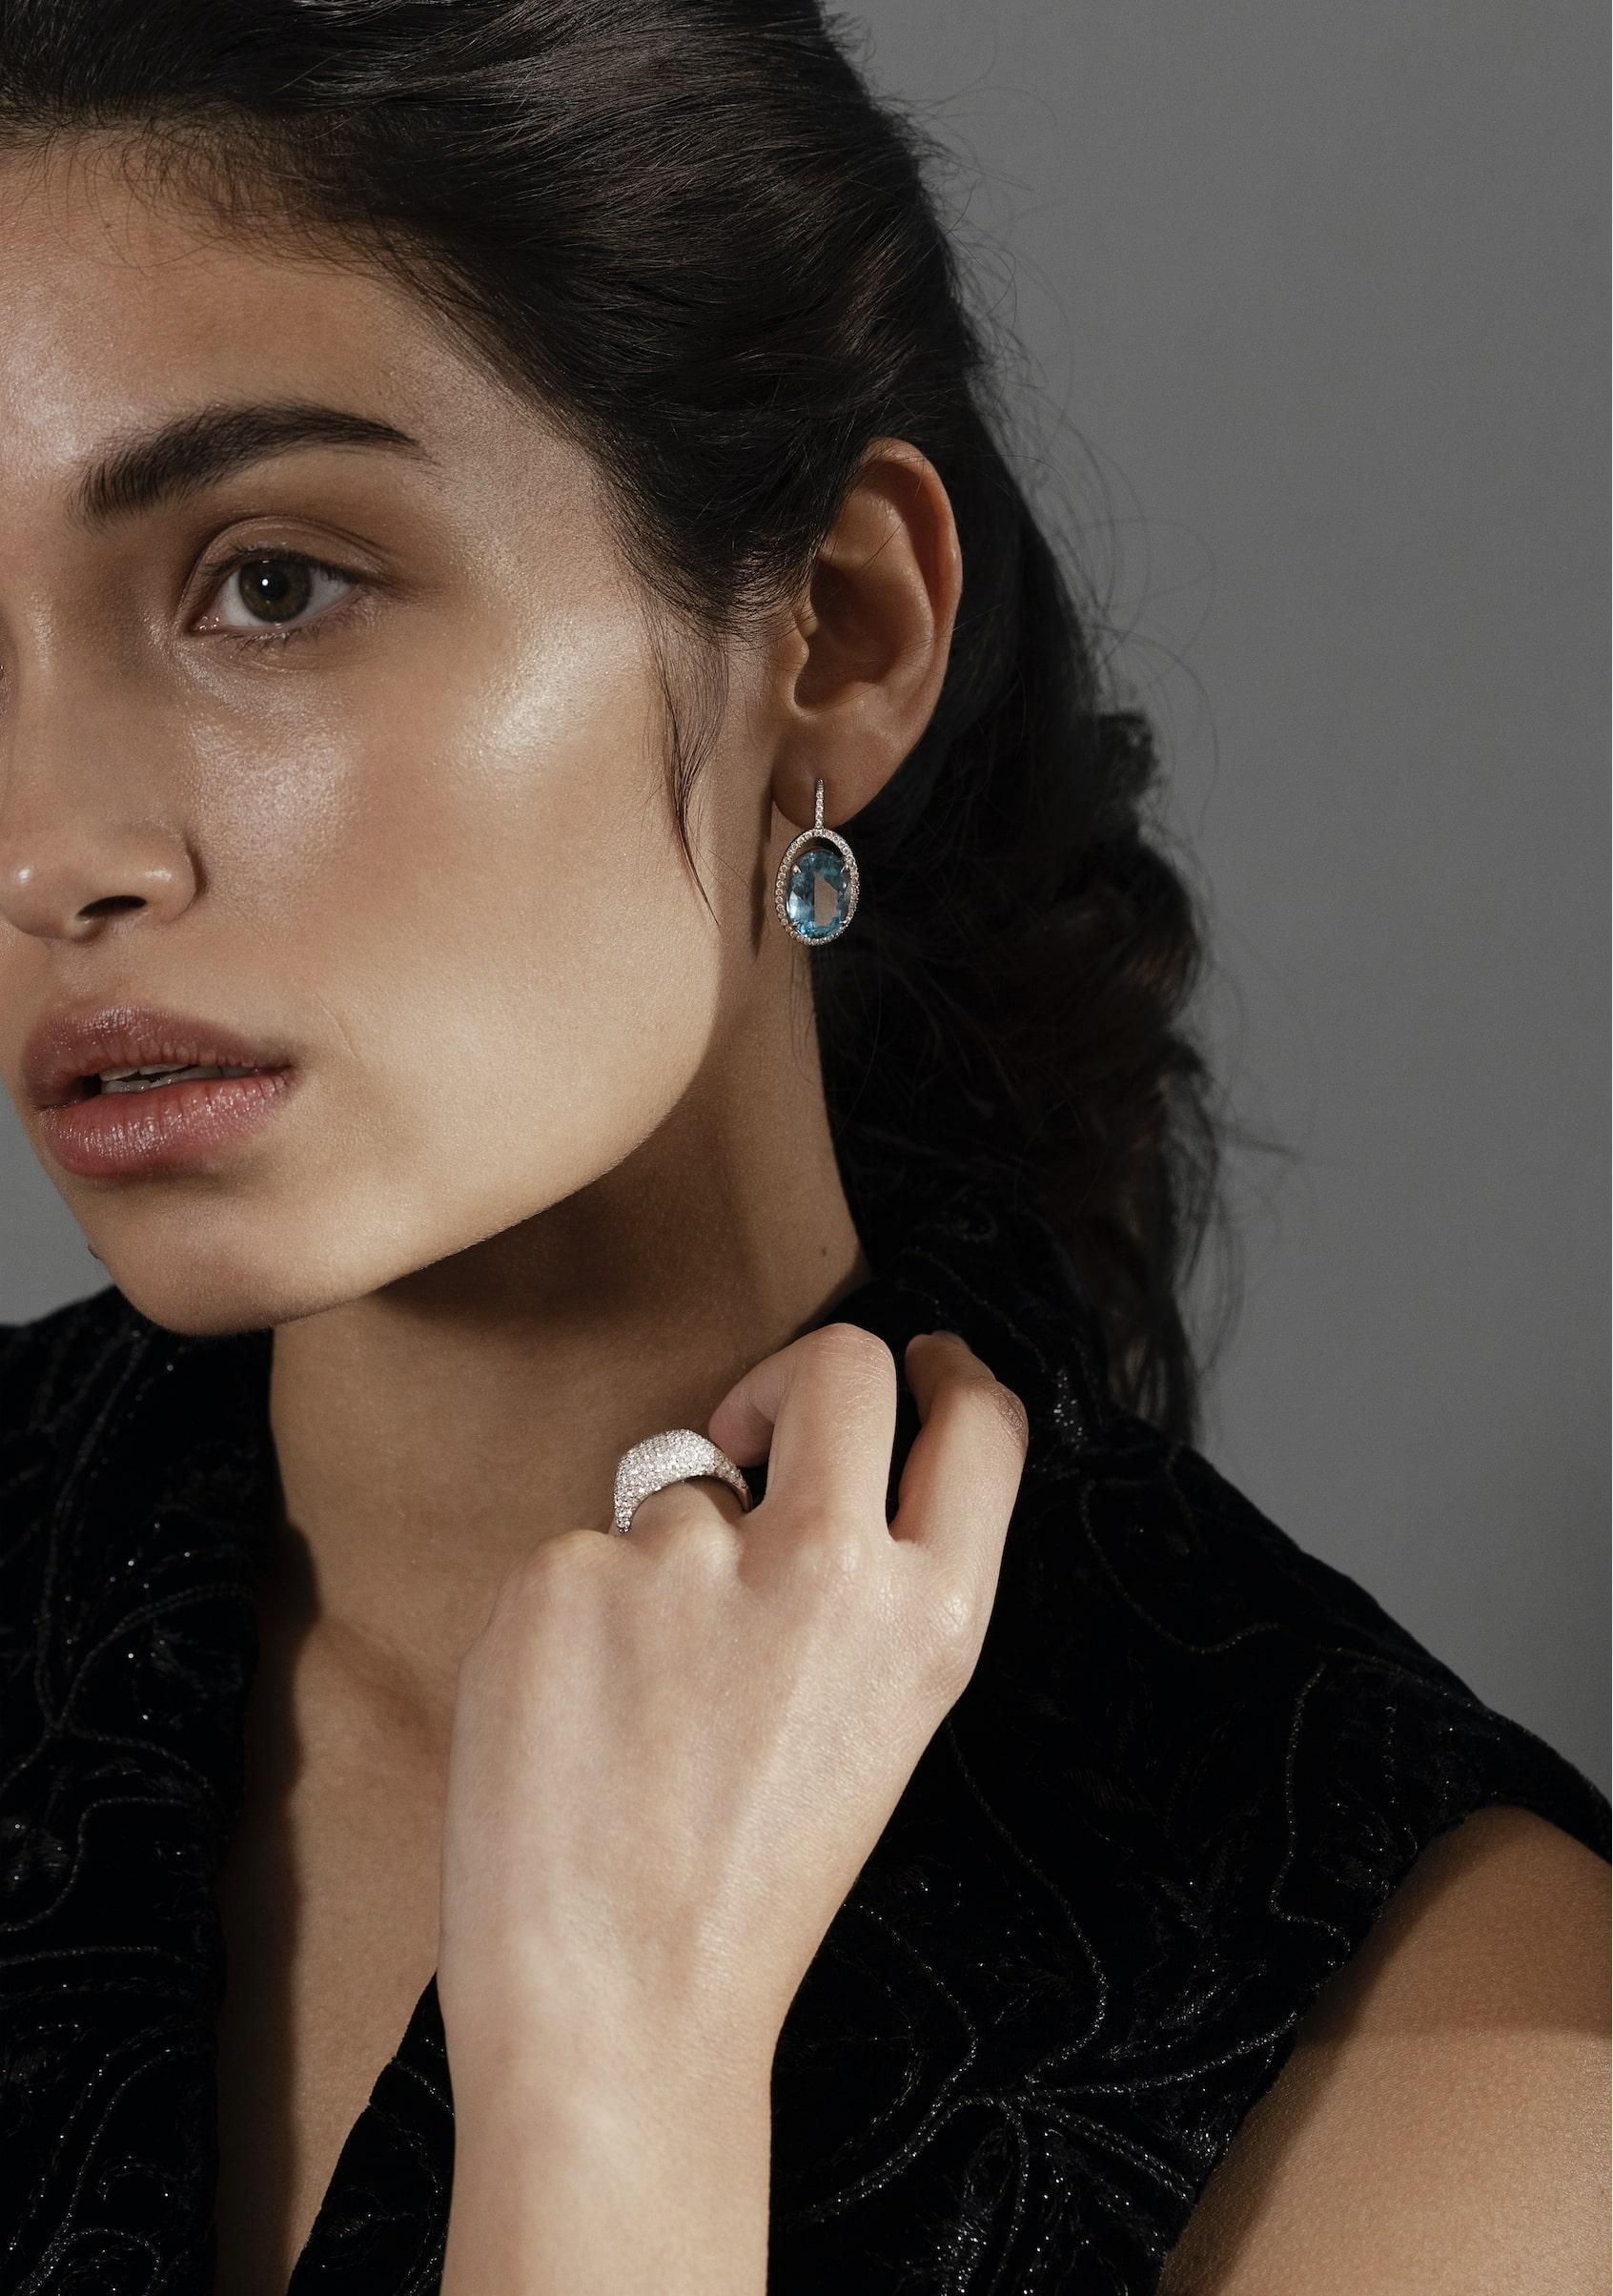 Alex Jona one-of-a-kind collection, hand crafted in Italy, 18 karat white gold pair of earrings, centering two finely cut oval intense blue aquamarines weighing 11.54 carats, surrounded by 0.57 carats of white diamonds, F color, VVS1 clarity.